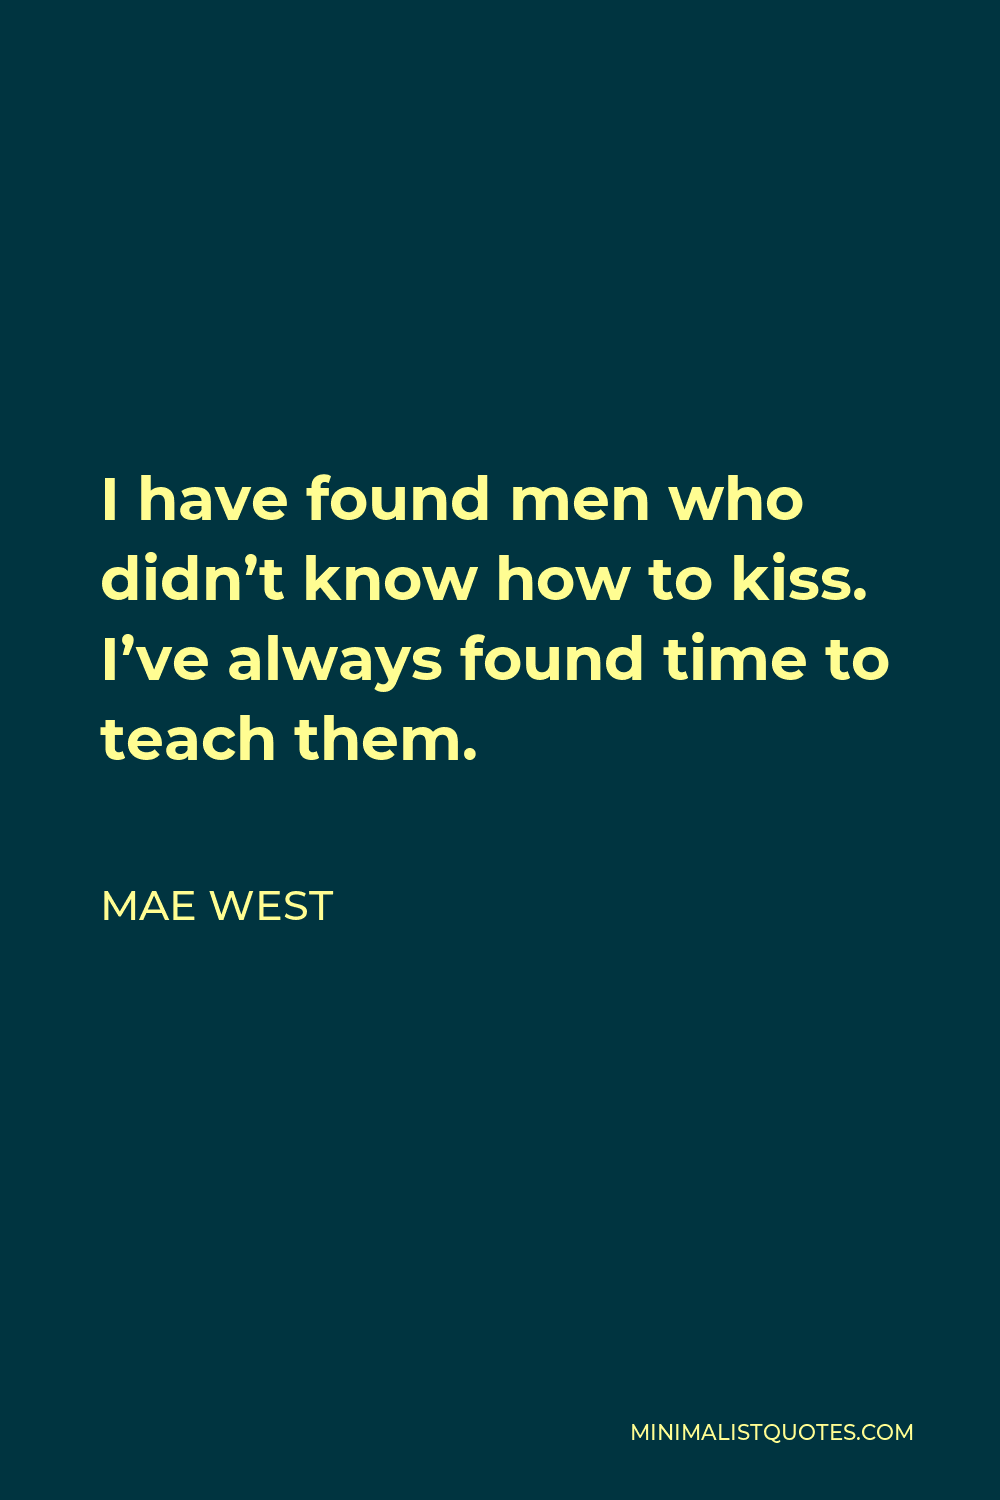 Mae West Quote - I have found men who didn’t know how to kiss. I’ve always found time to teach them.